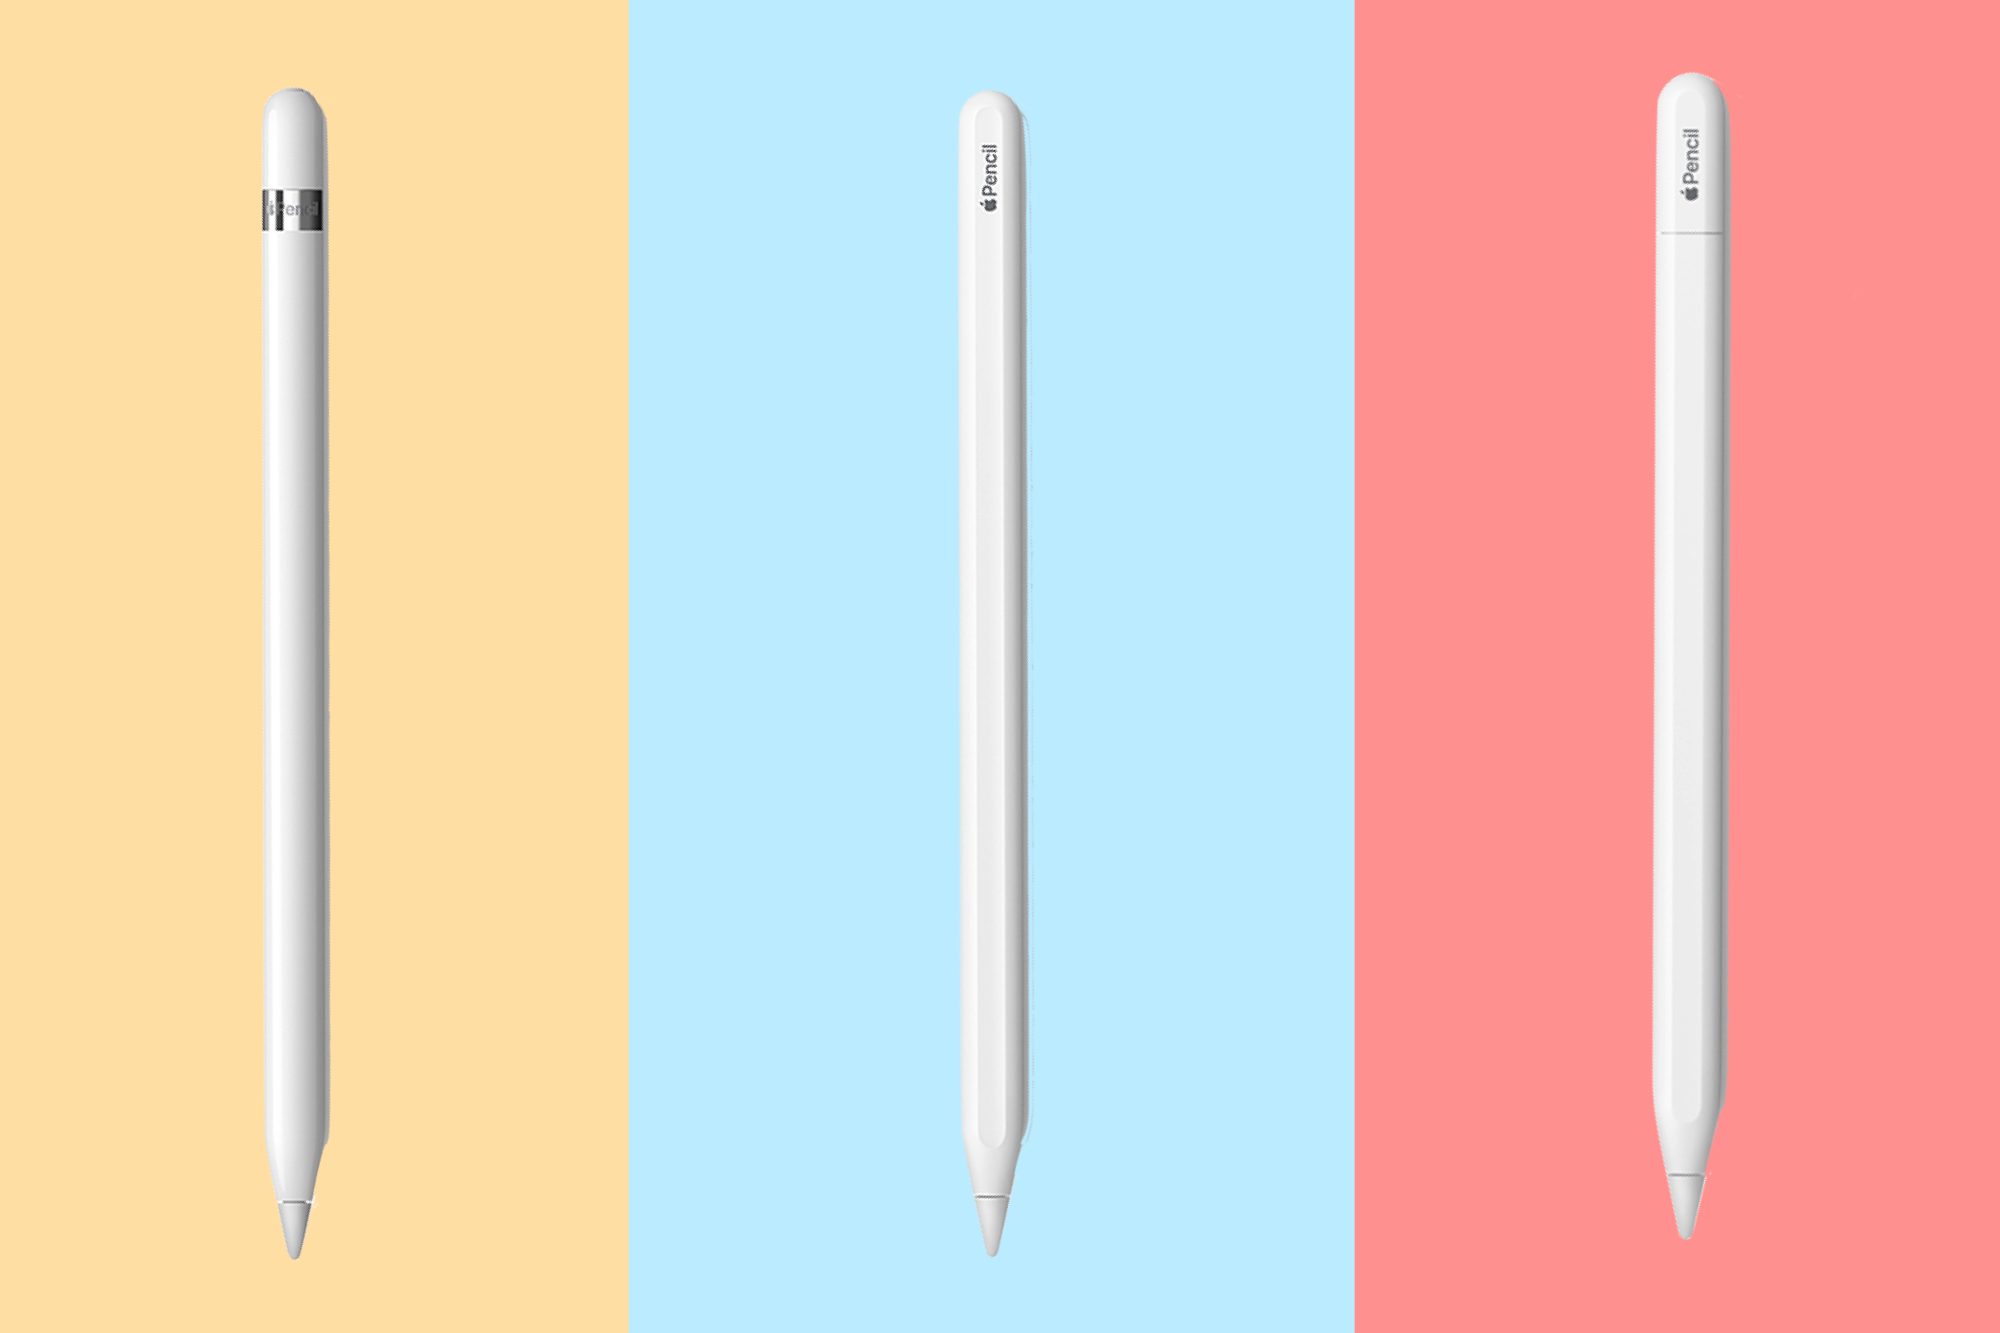 Apple's second-generation Pencil is cheaper than ever